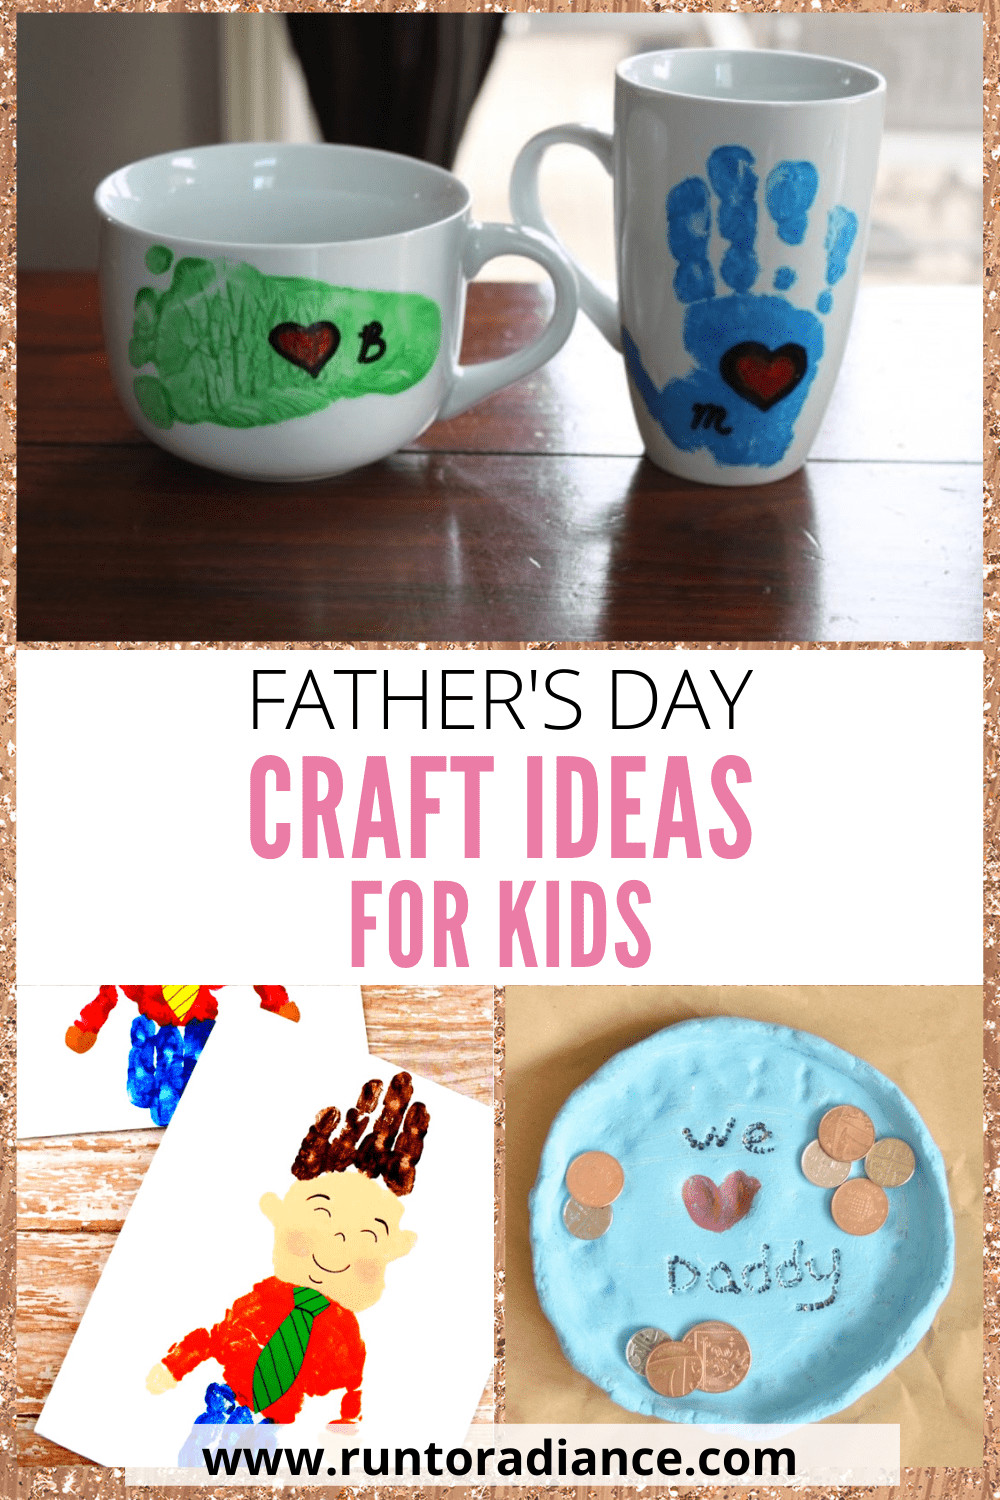 35+ Thoughtful Mother's Day Crafts & DIY Gift Ideas  Mothers day crafts,  Diy mother's day crafts, Diy crafts for gifts